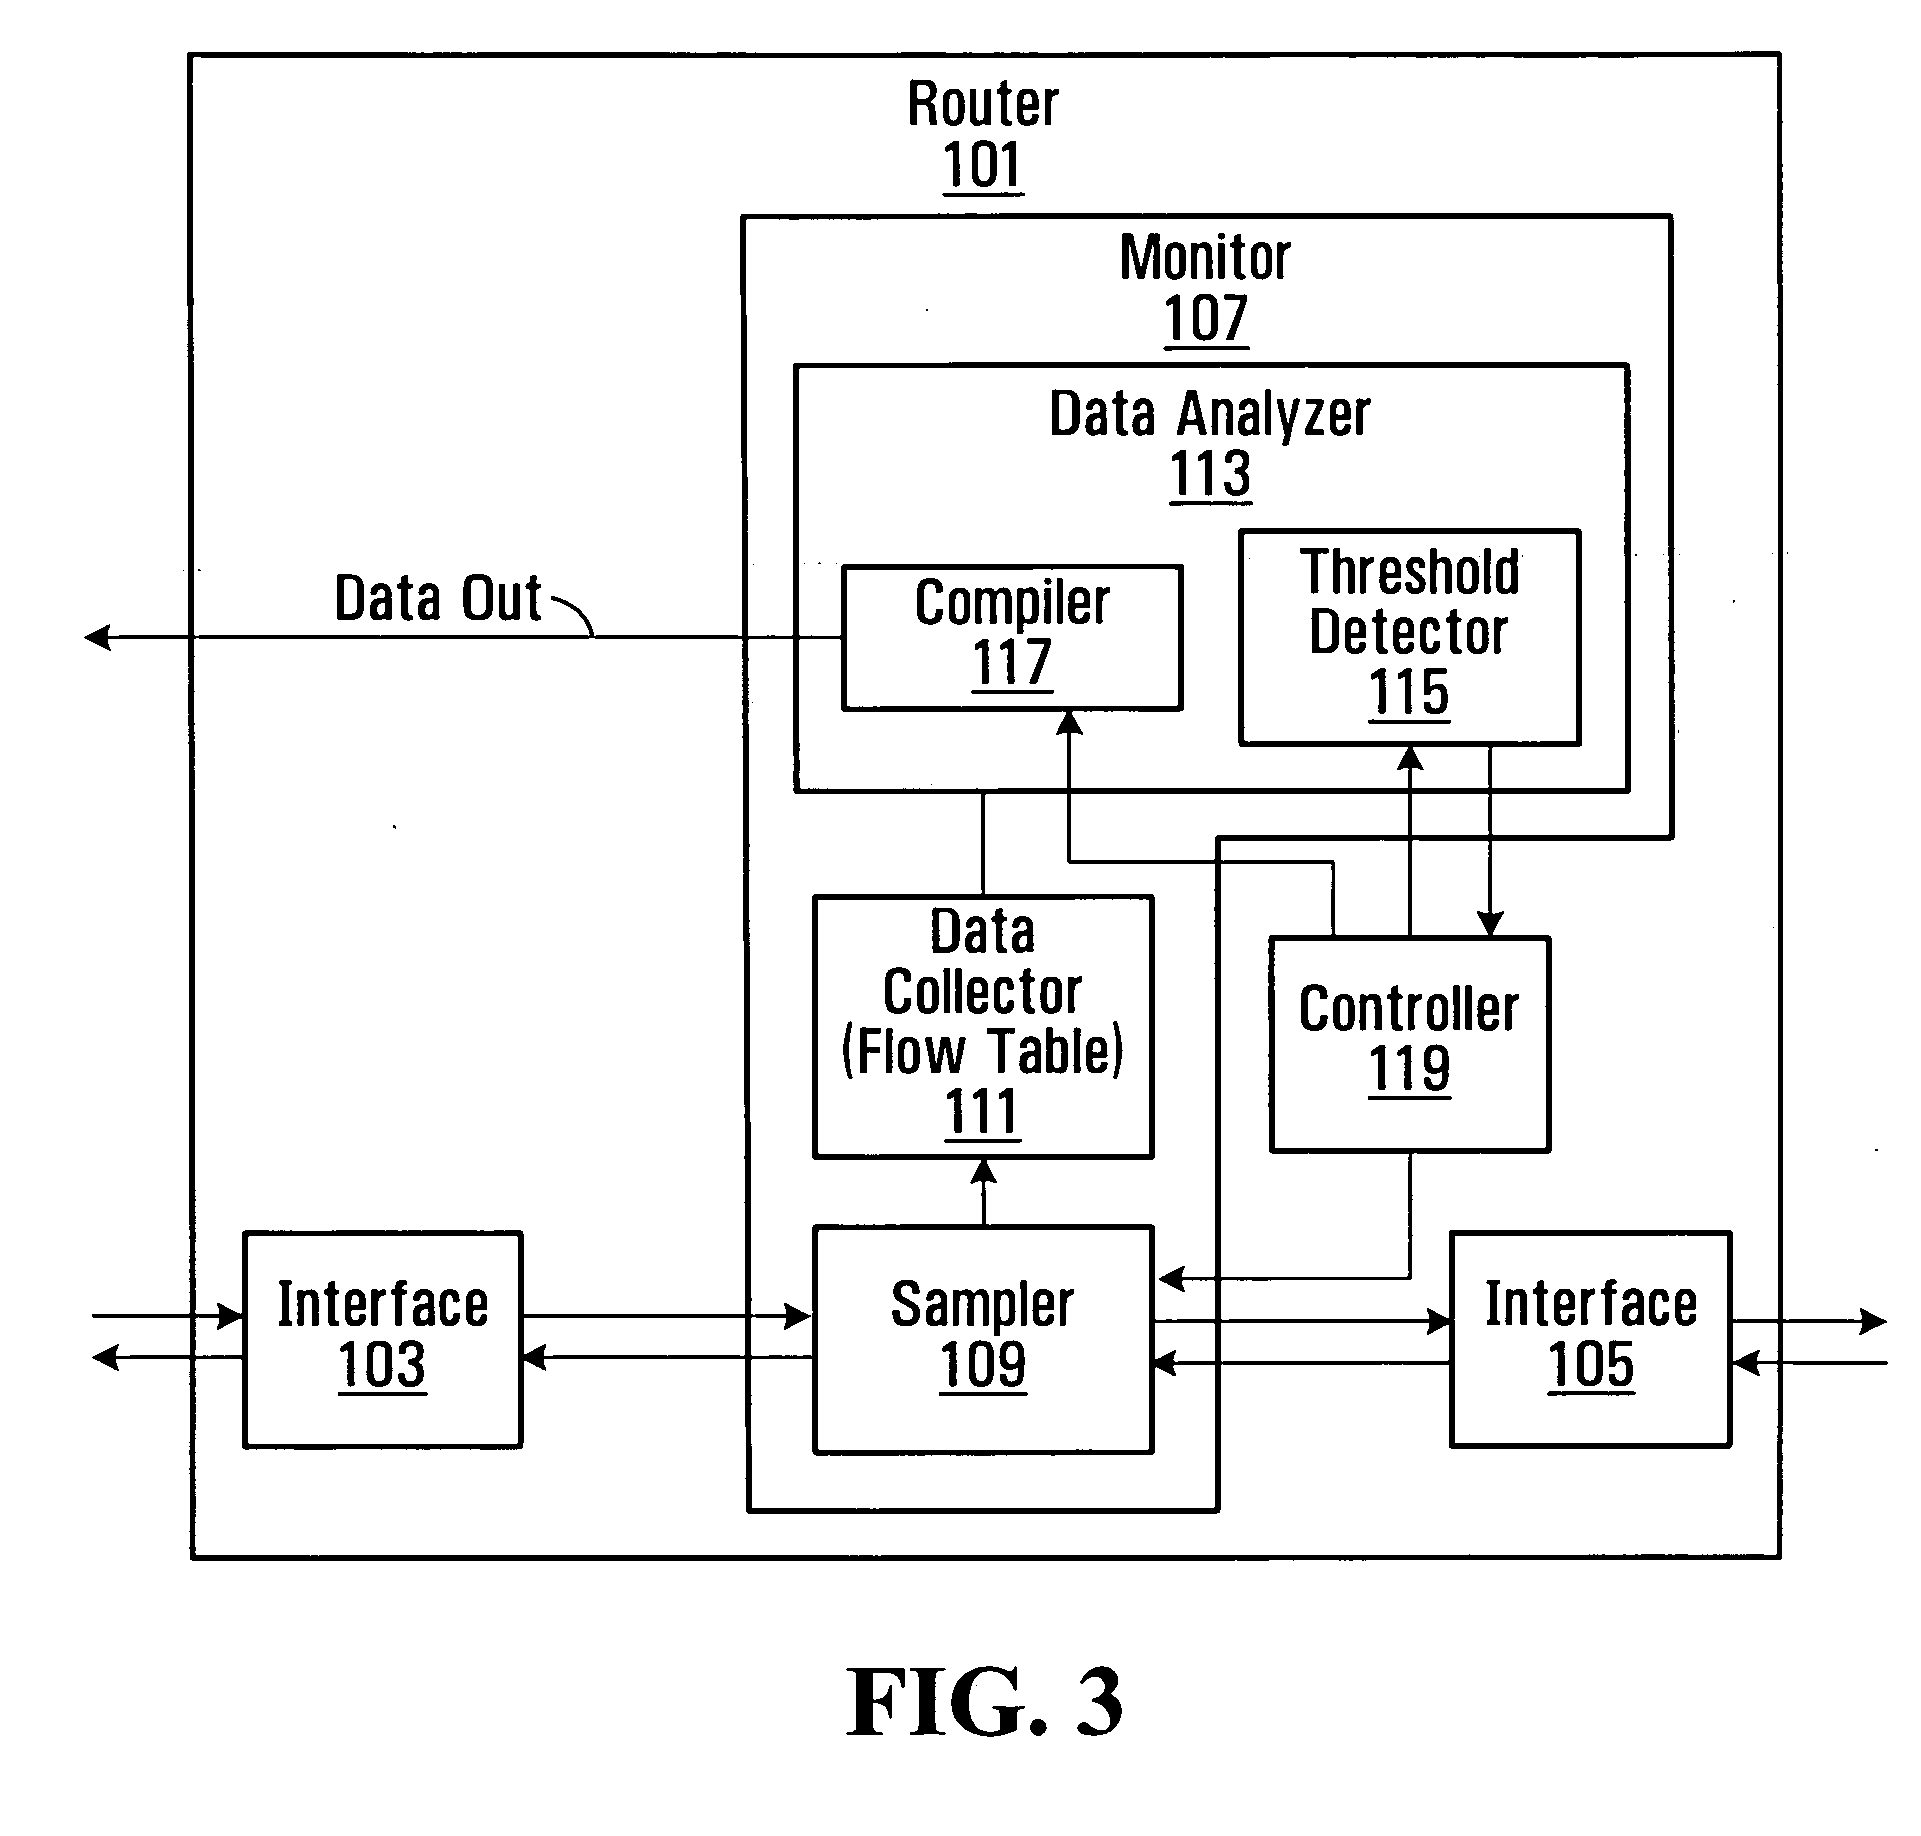 Method and apparatus for monitoring malicious traffic in communication networks